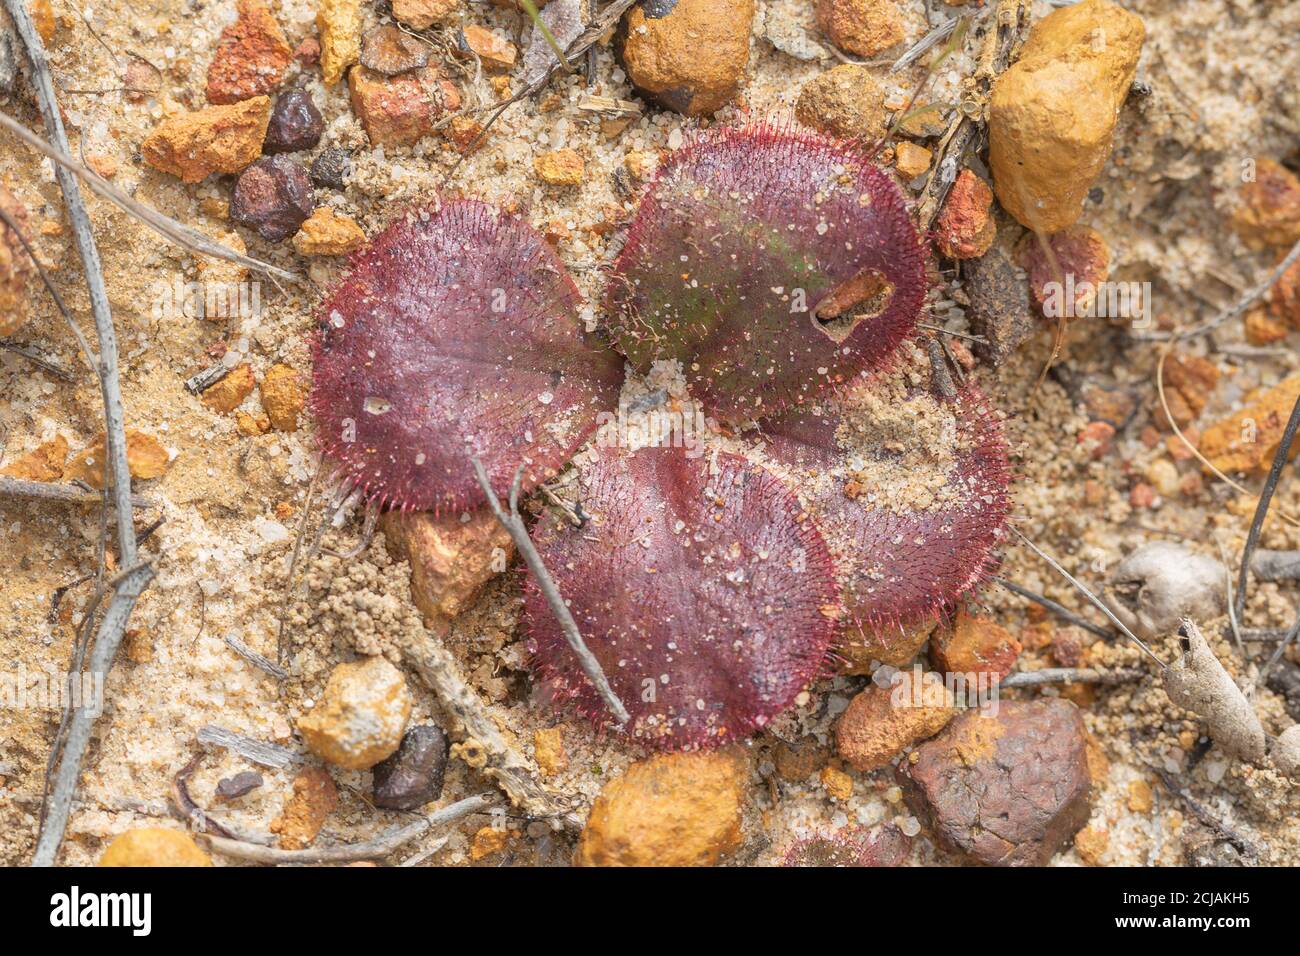 The red rosetted carnivorous plant Drosera magna (Sundew) seen east of Jurien Bay in Western Australia Stock Photo